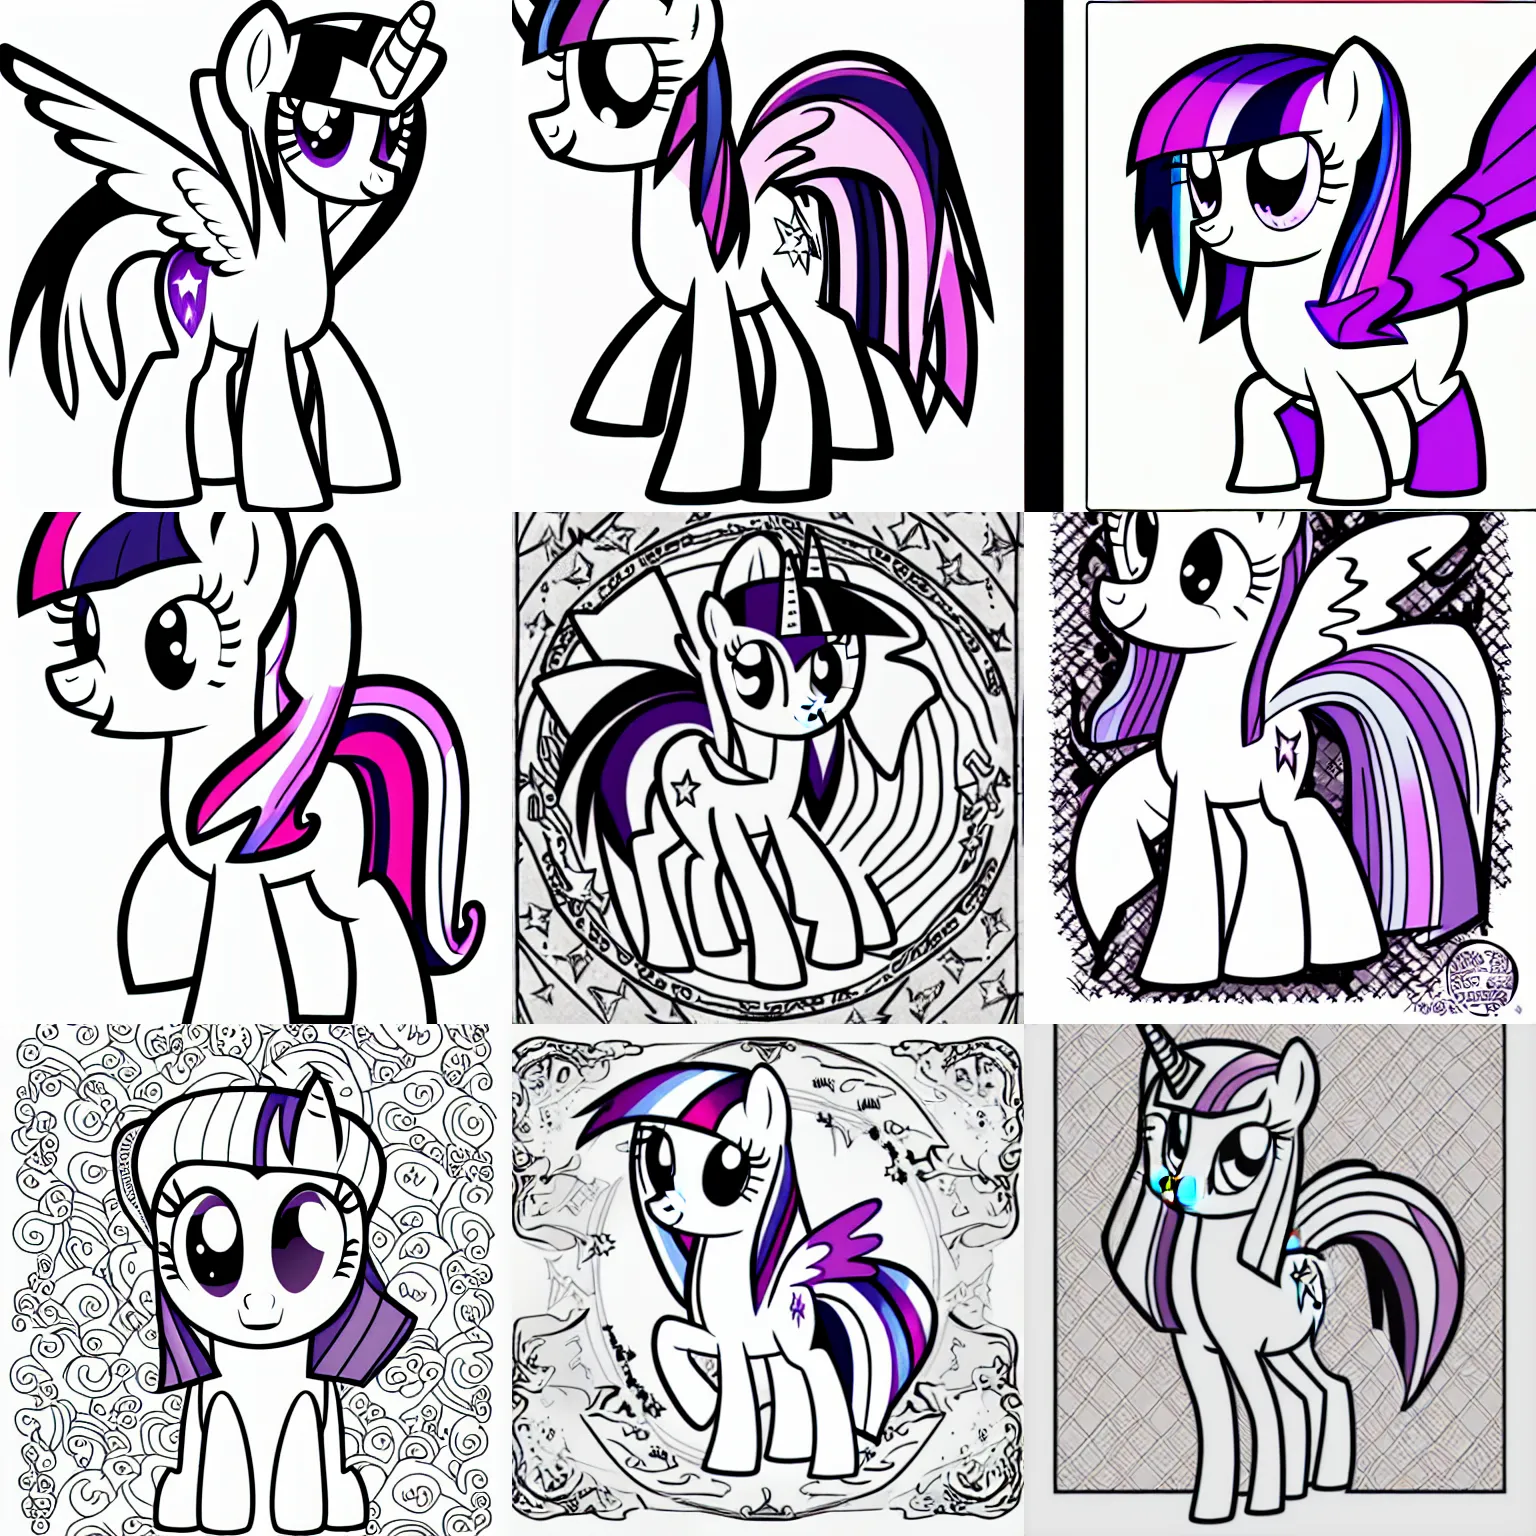 Prompt: Twilight Sparkle from My Little Pony: Friendship is Magic, uncolored black and white page from a coloring book